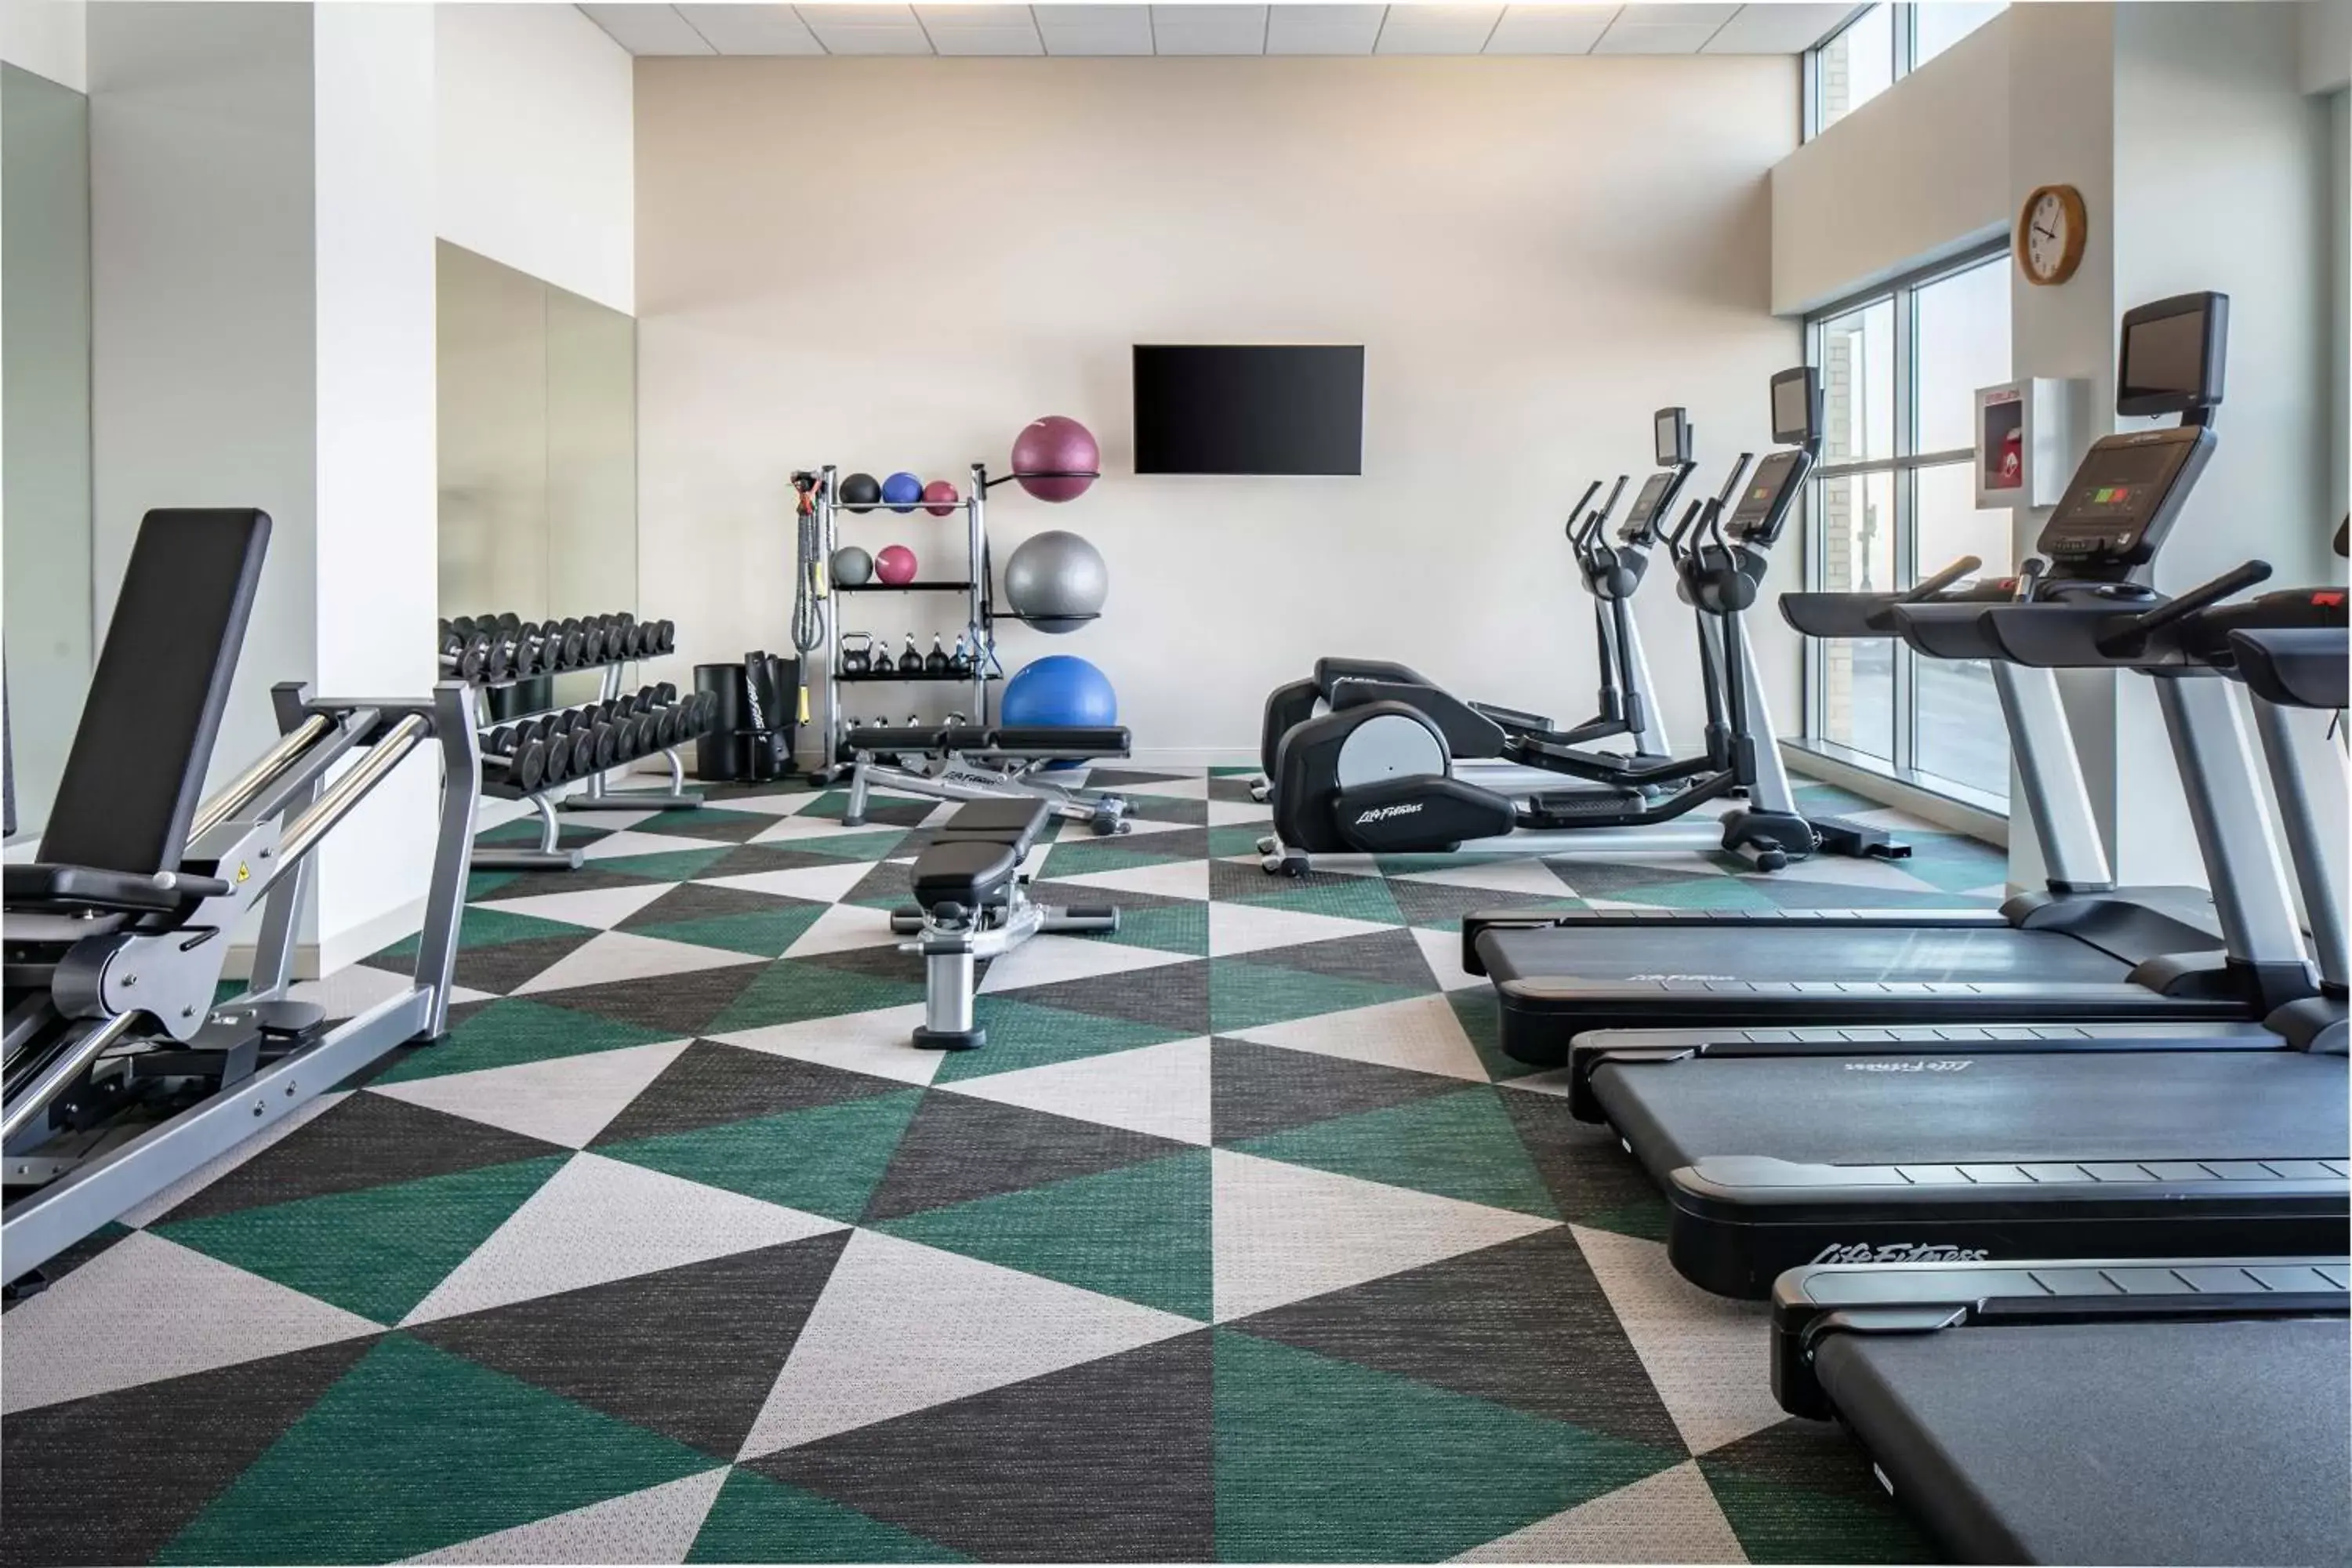 Fitness centre/facilities, Fitness Center/Facilities in Element Omaha Midtown Crossing